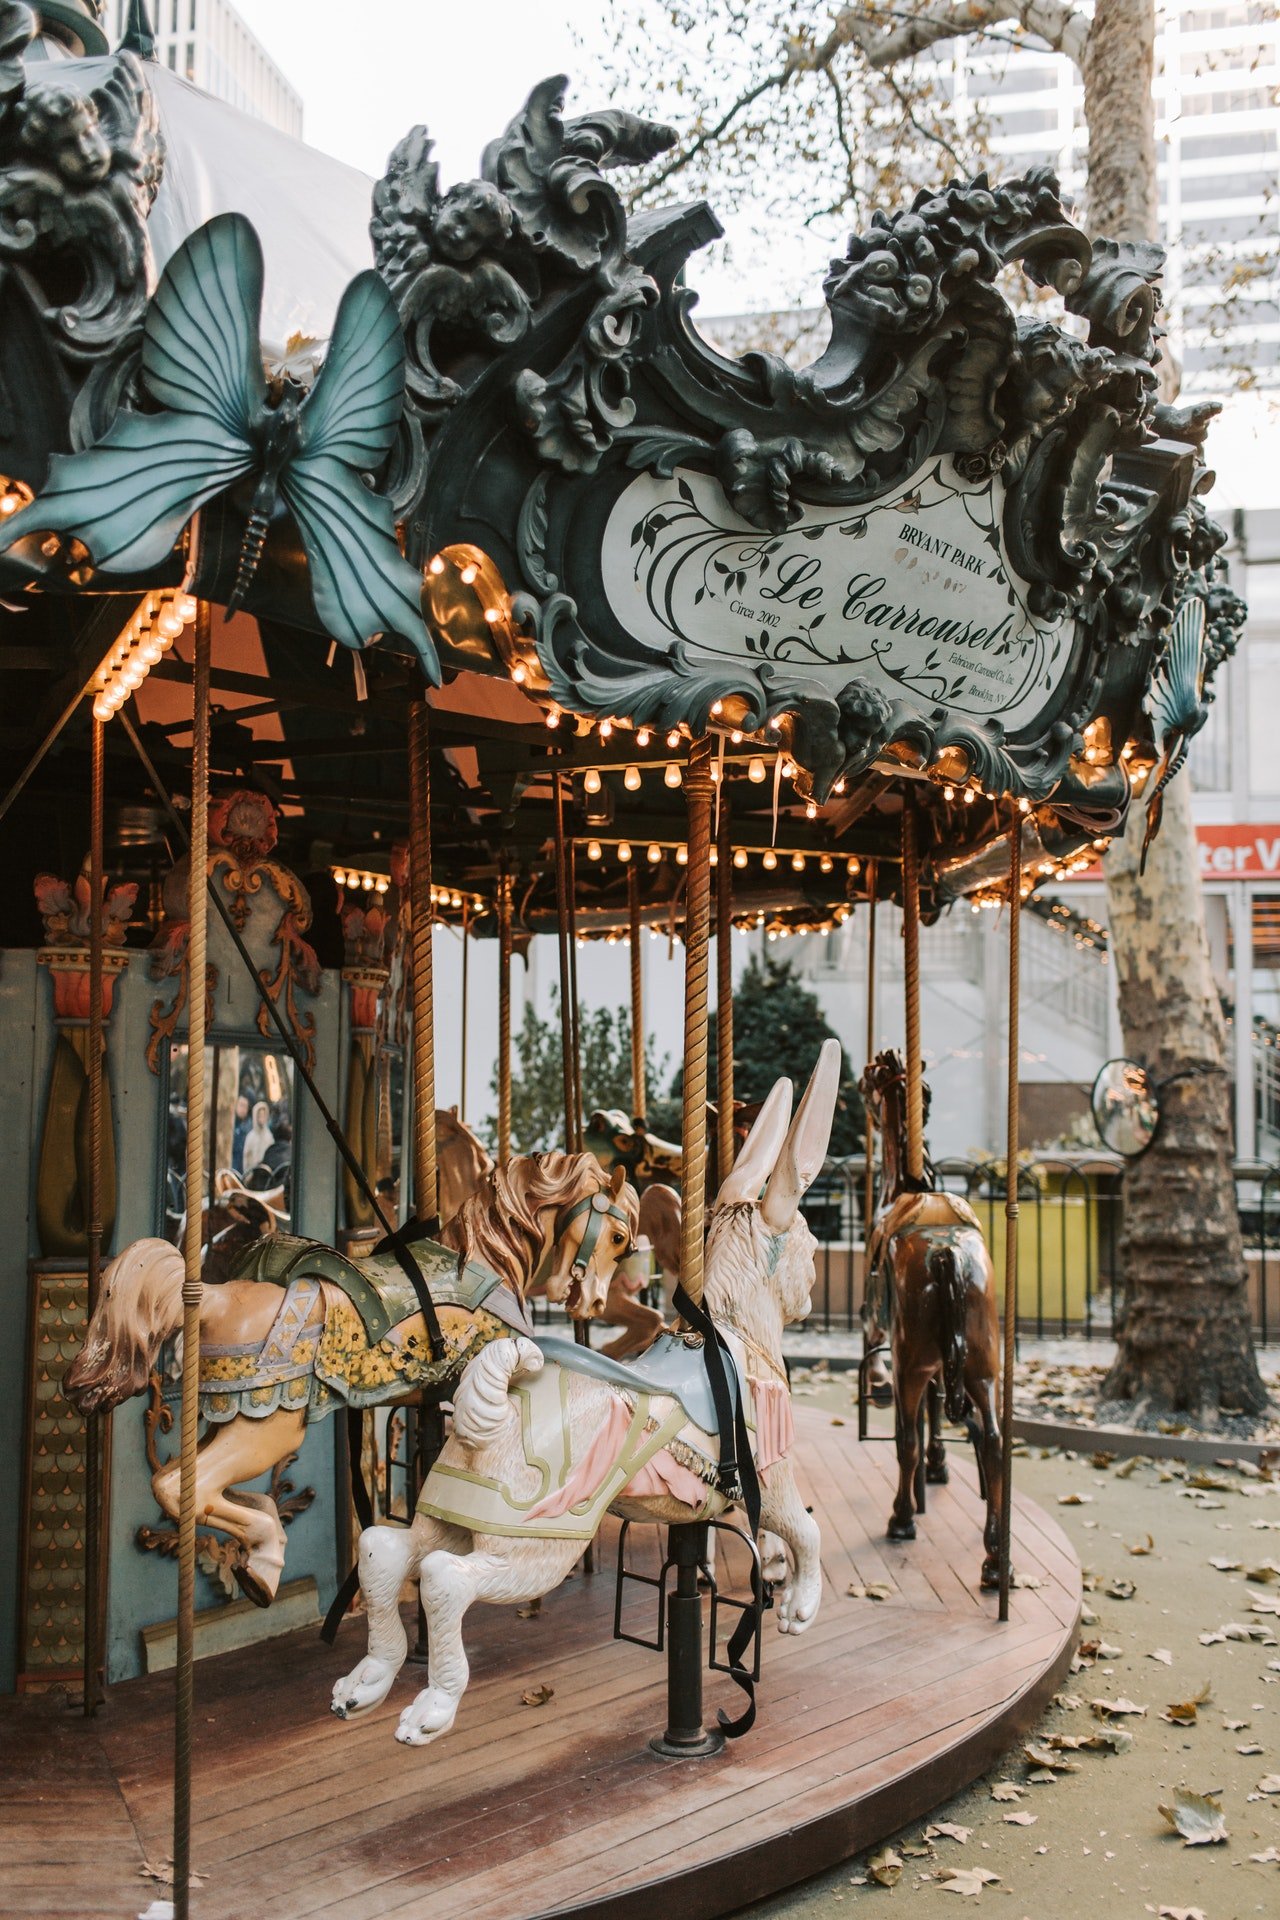 She pulled on her grandmother's hand until they reached the carousel, her favorite ride. | Source: Pexels